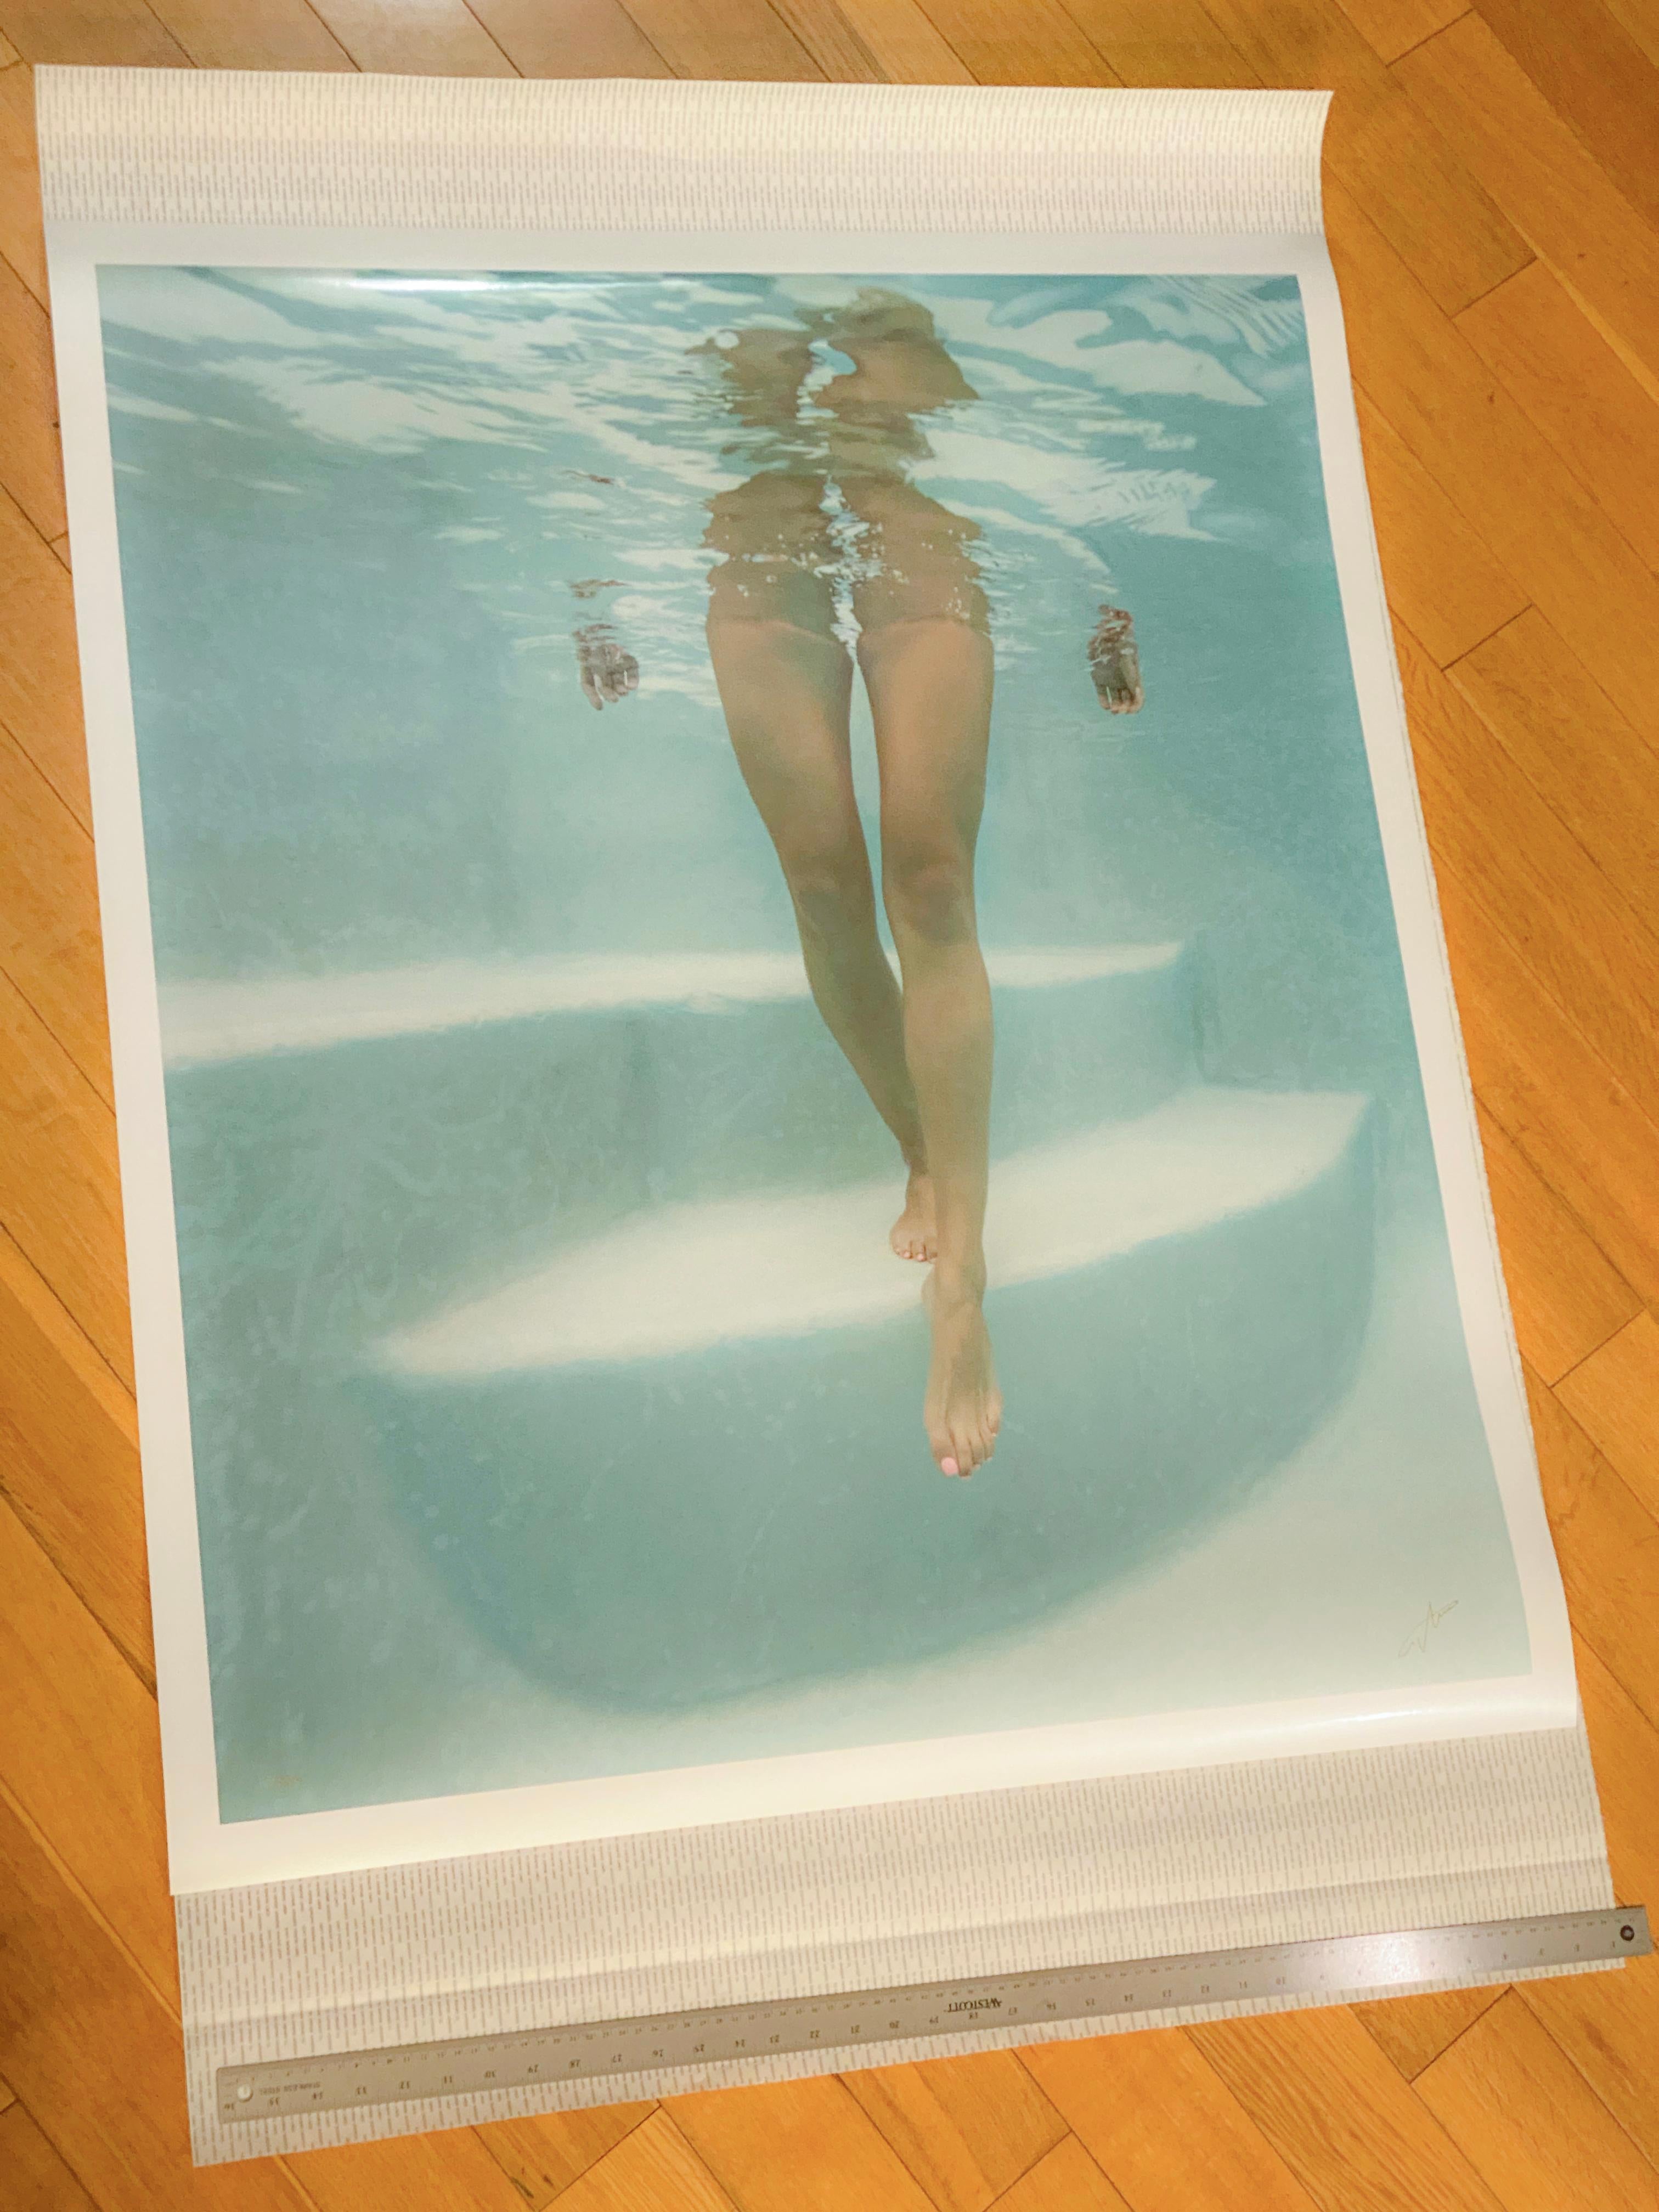 A light and very becoming underwater photograph of a girl walking down the steps in pool toward you. The light blue photograph shows no swimsuit neither any places where you would expect a swimsuit. This photograph gets a lot of attention at